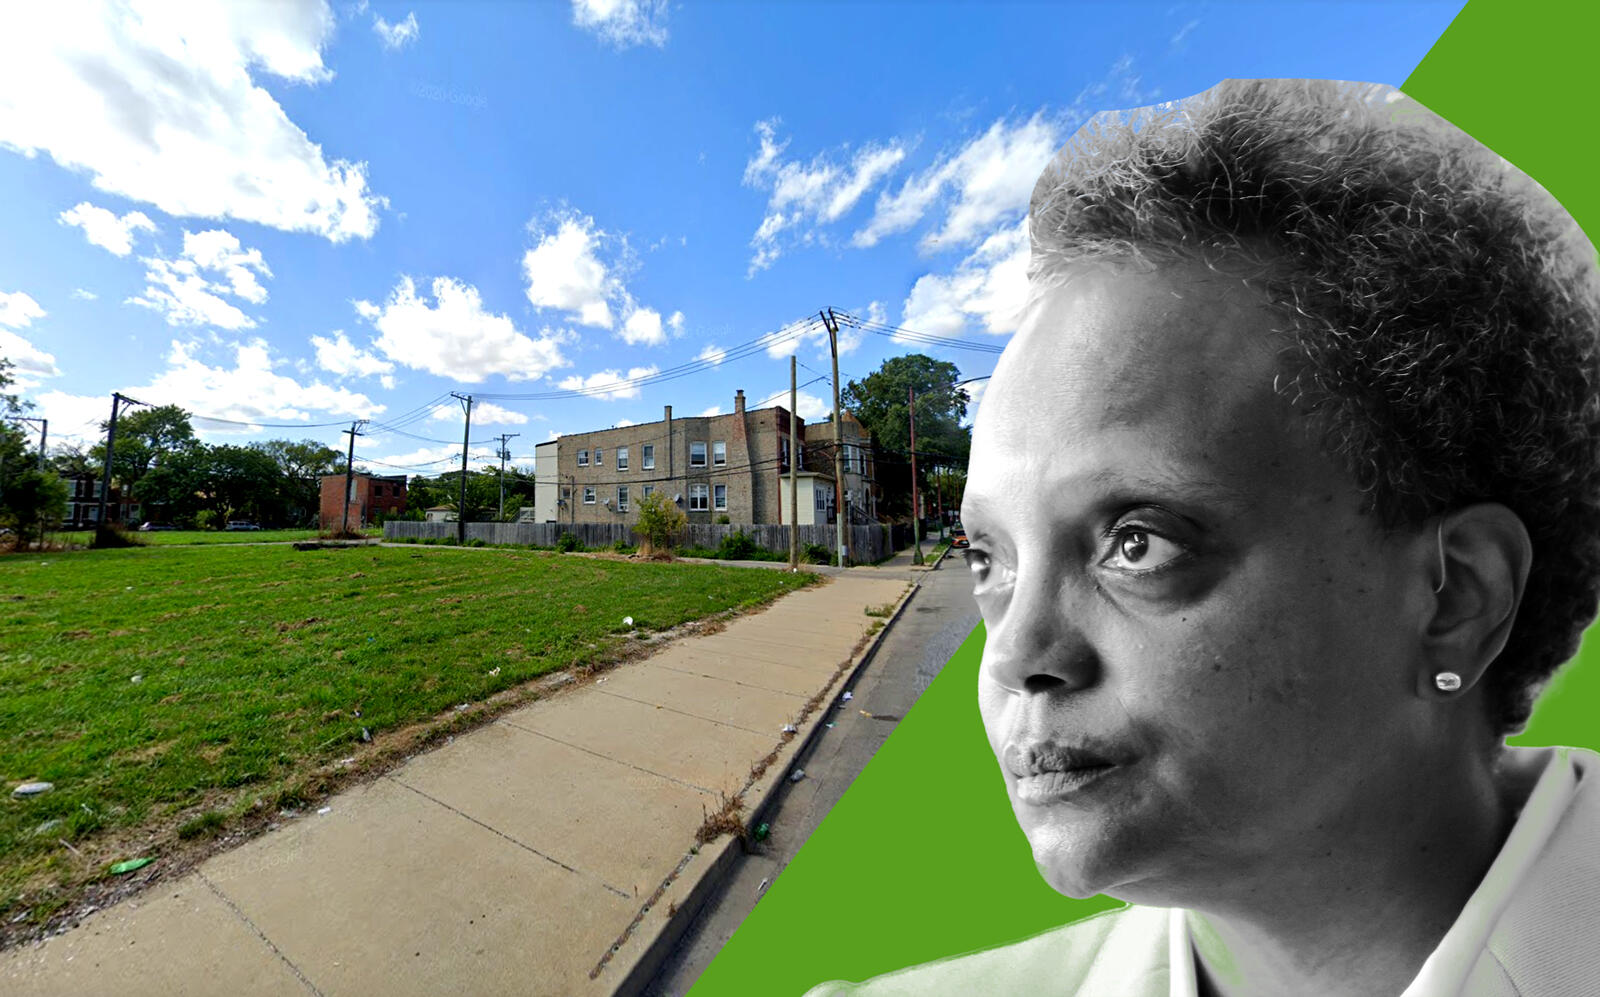 Mayor Lori Lightfoot announced the city would sell 250 vacant lots in North Lawndale for $1 each, to be transformed into affordable housing. (Google Maps, Getty)